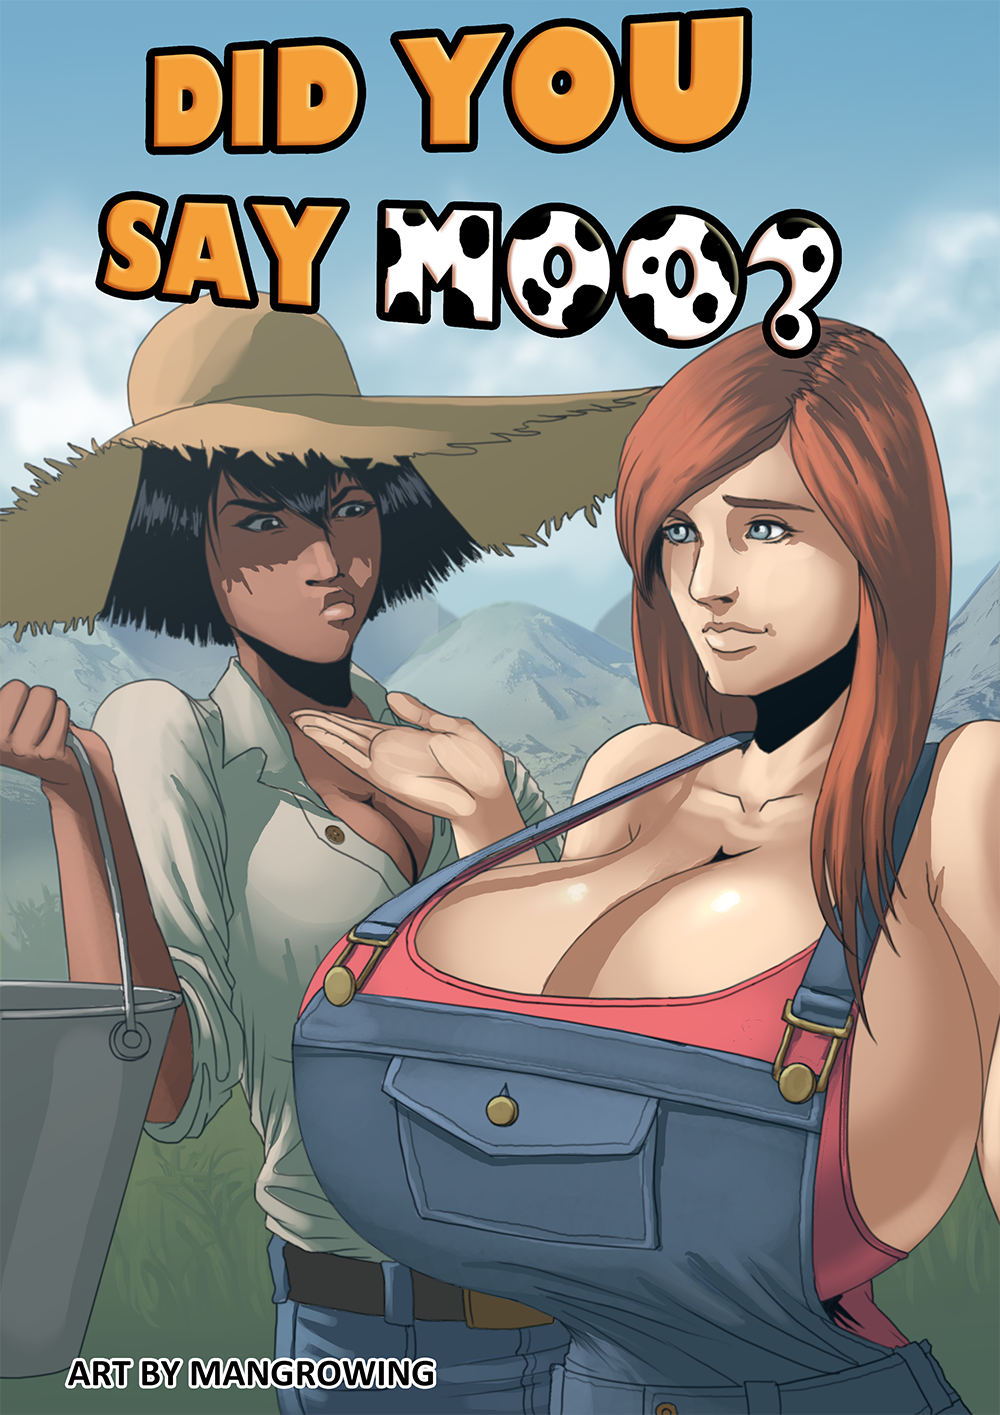 Hemingway reccomend giant boobs expansion